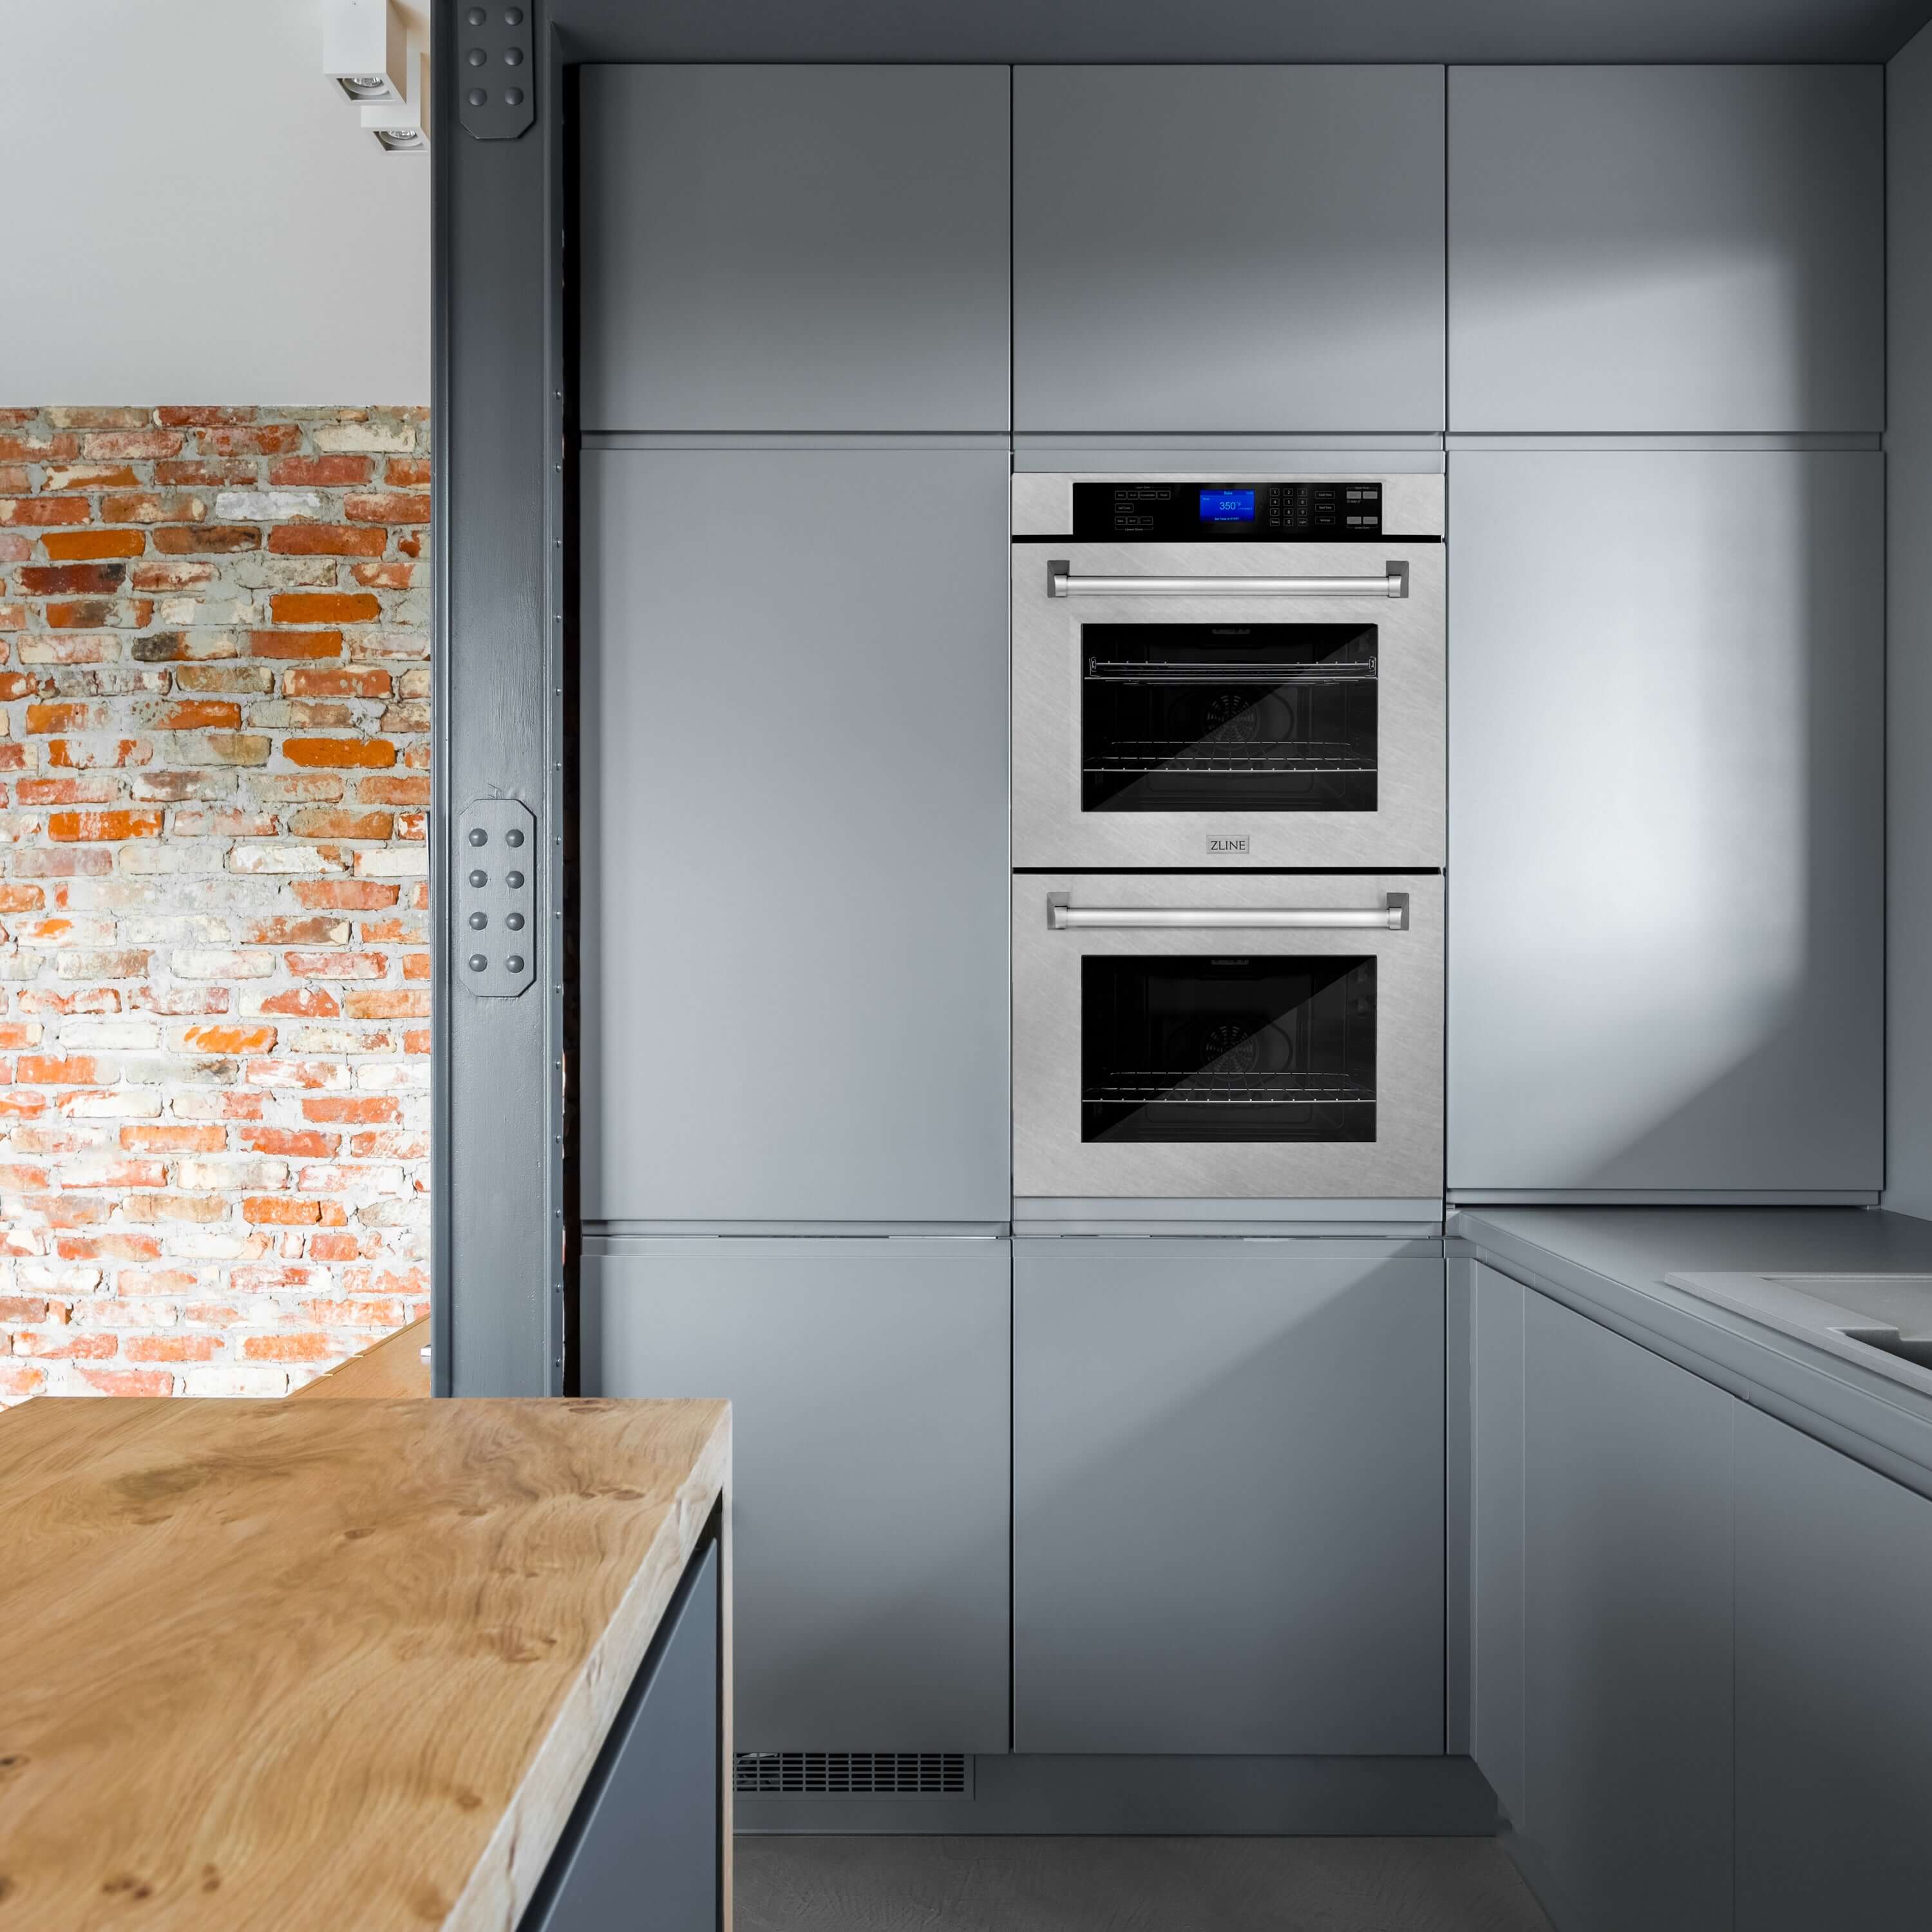 ZLINE double wall oven built-in to wall of modern industrial-style kitchen.